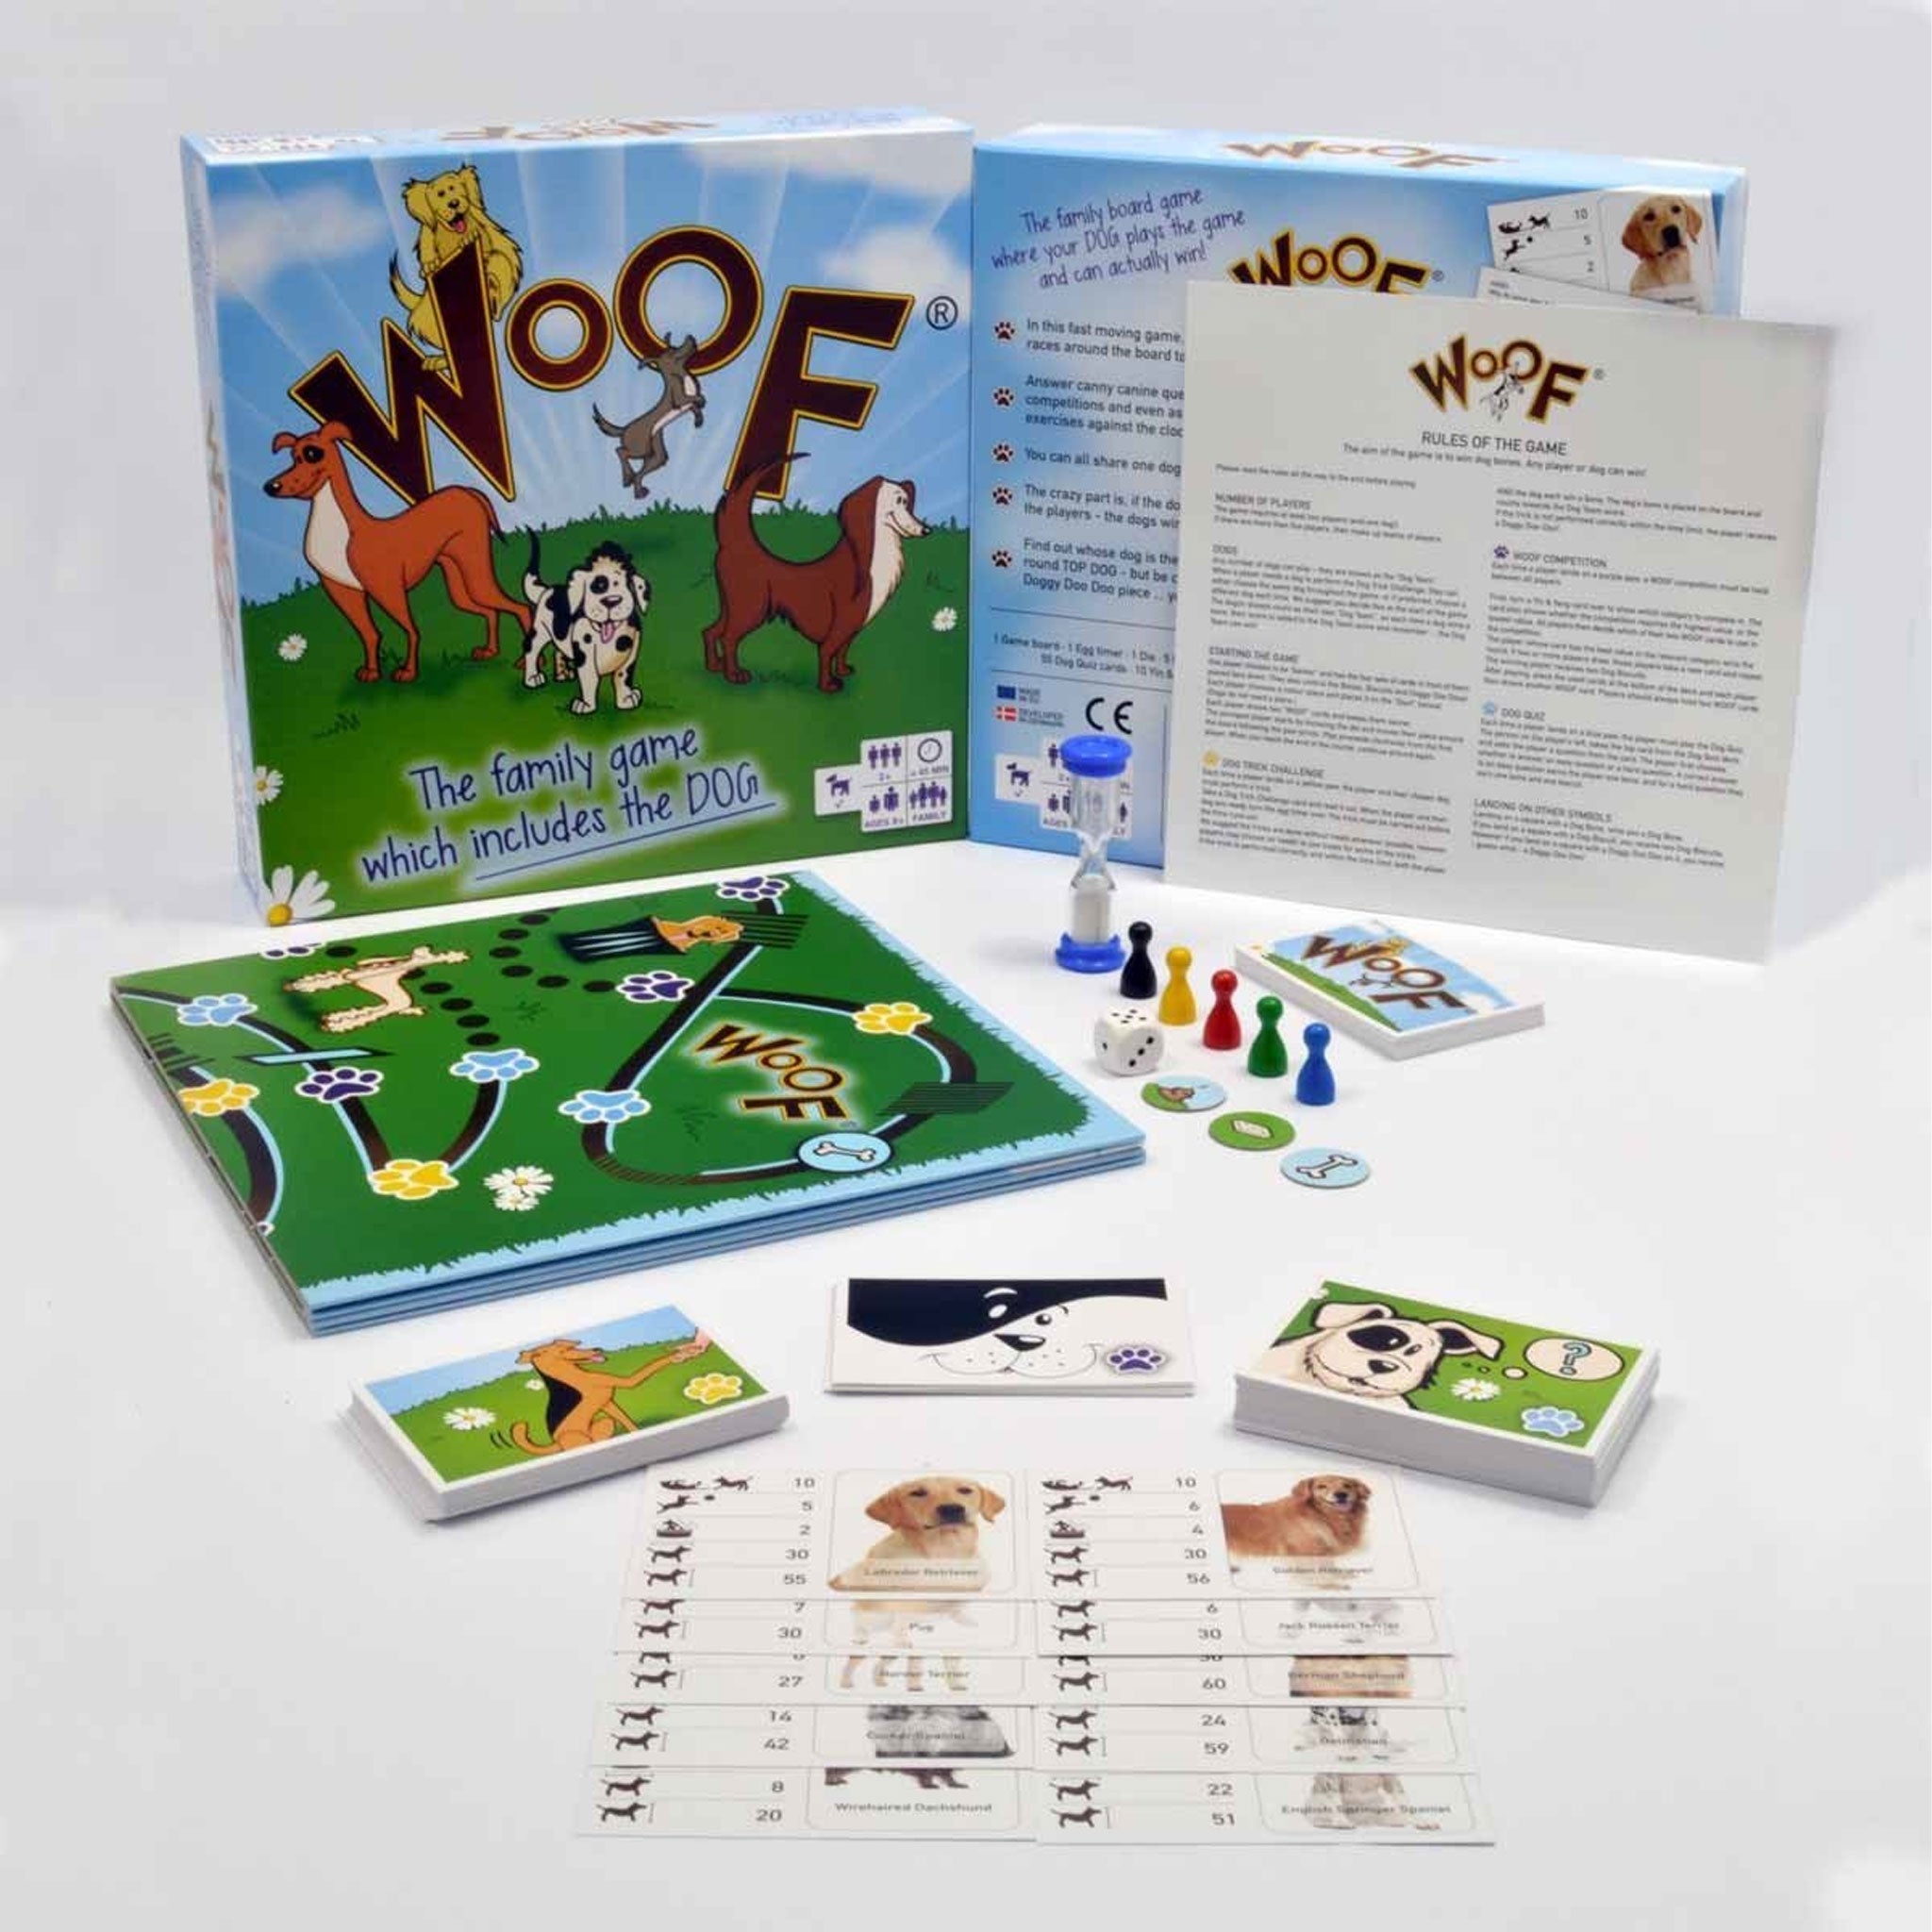 A full image of all the components featured in the Woof board game.